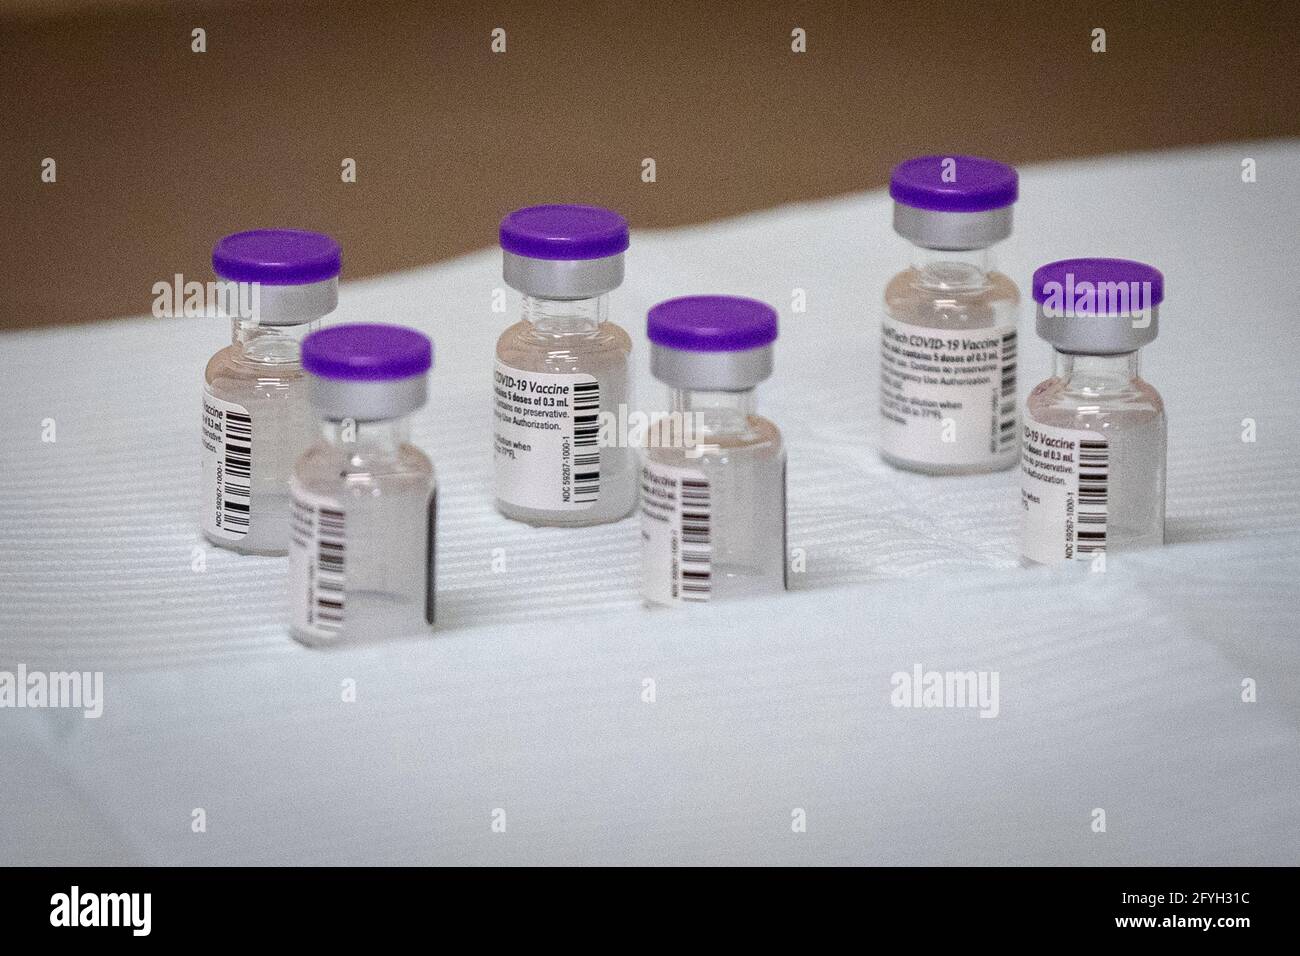 Several vials of Pfizer-BioNTech COVID-19 vaccine at the Strathcona Paper Centre in Napanee, Ontario on Monday, March 15, 2021, as the COVID-19 pandem Stock Photo